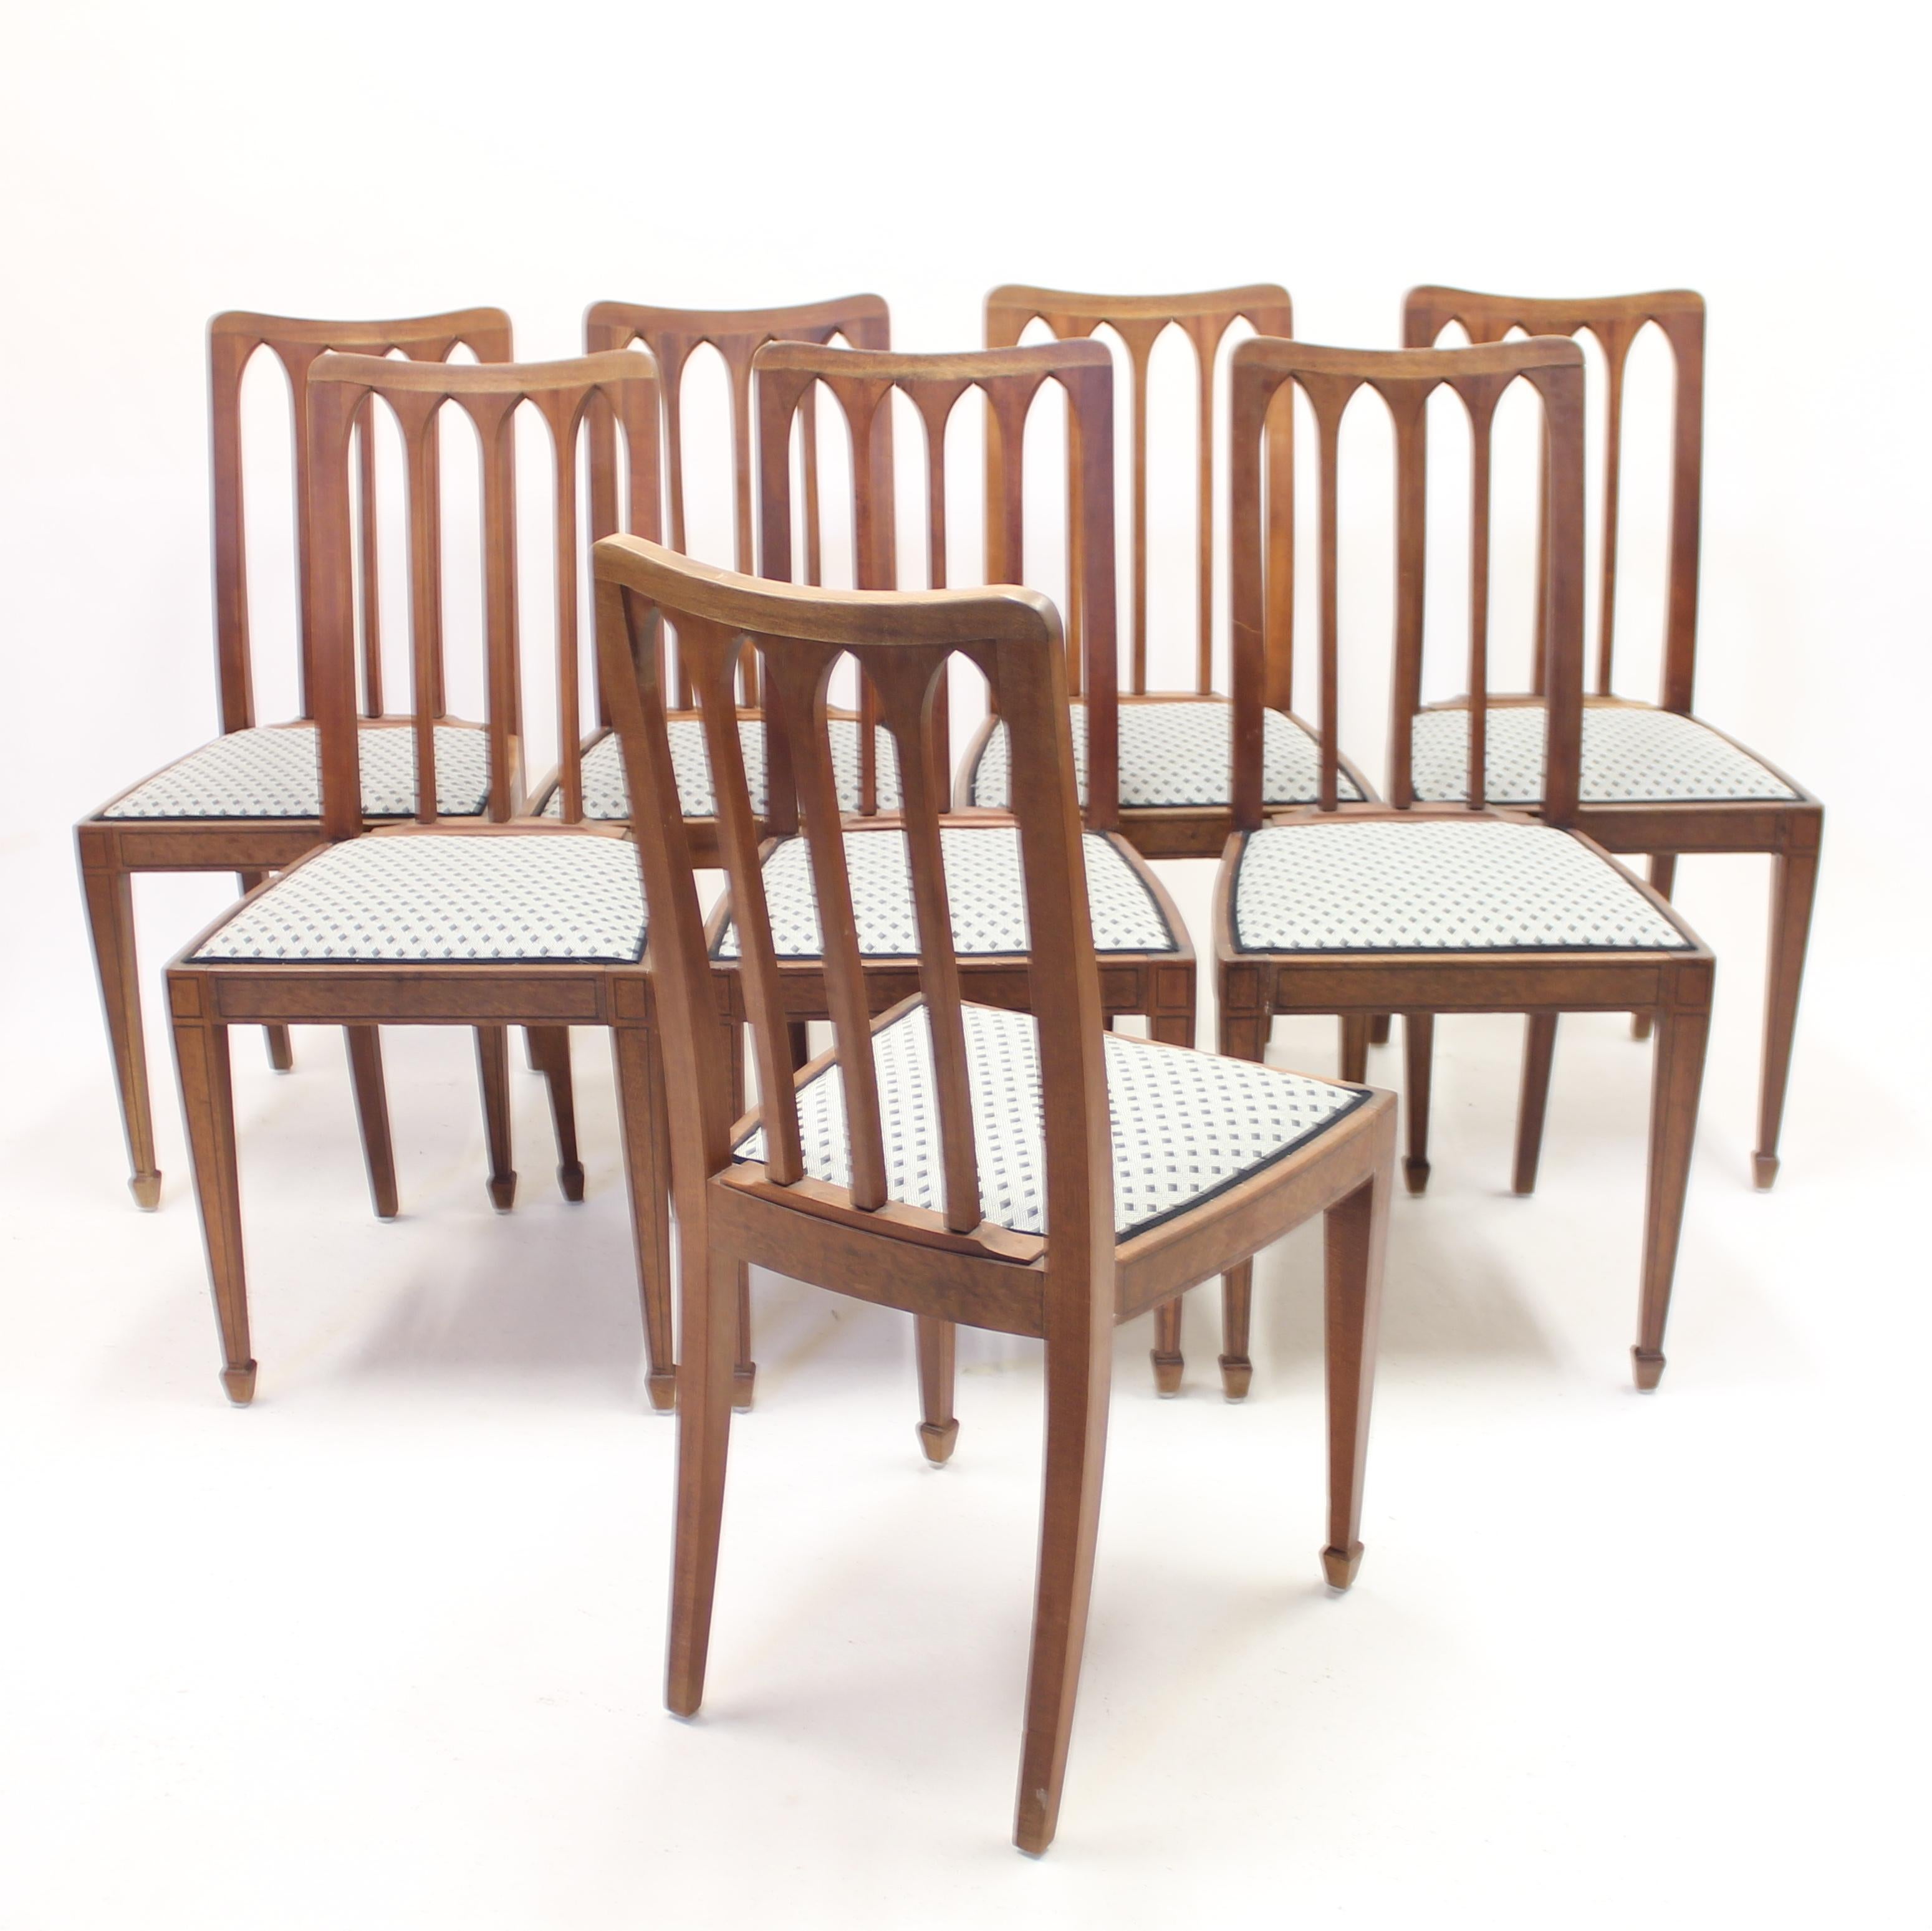 Set of 8 Oak Architectural Arts & Crafts Chairs, Early 20th Century 1